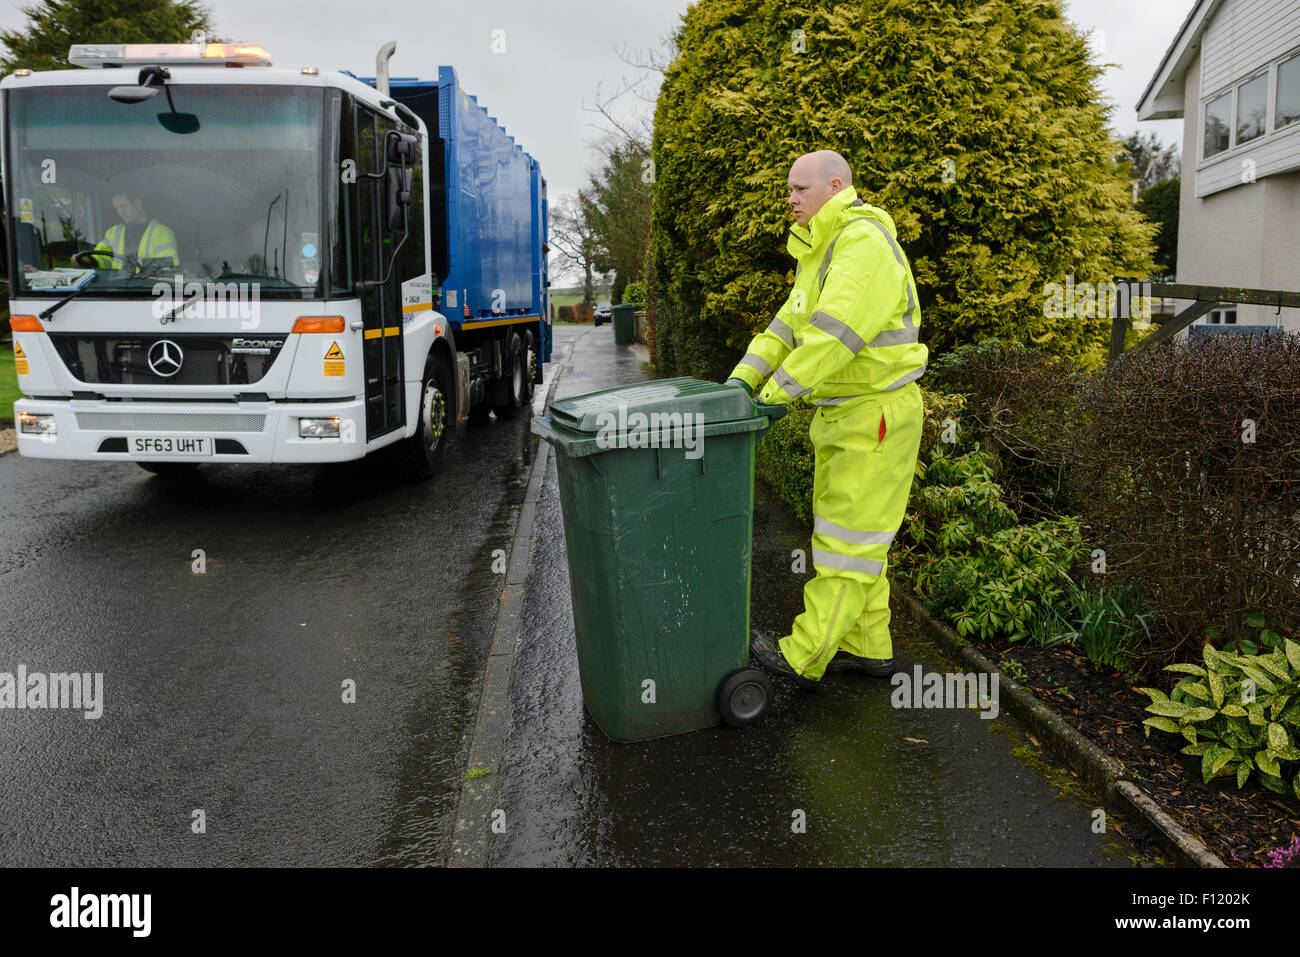 Bin men on thier refuse collection round in a small town in Scotland Stock Photo